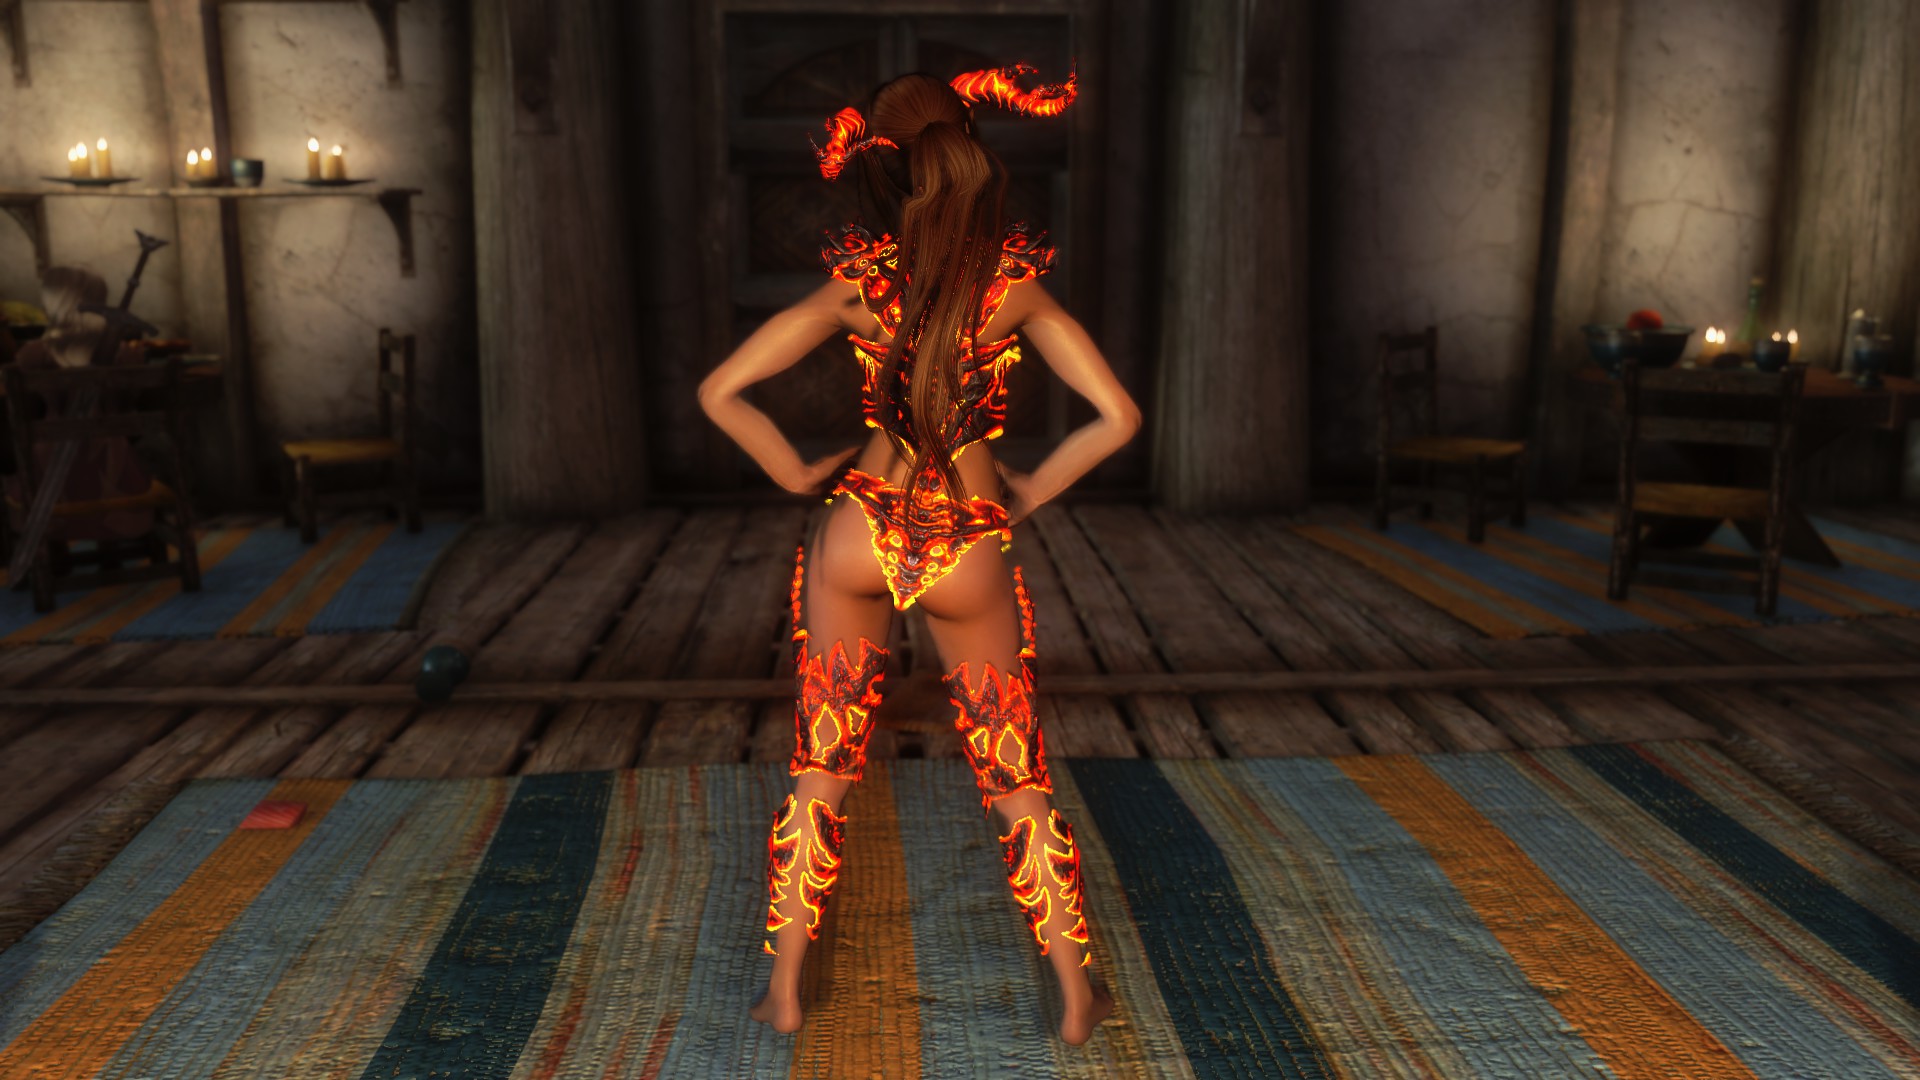 Skyrim atronach. Porn top rated pic Free. Comments: 1